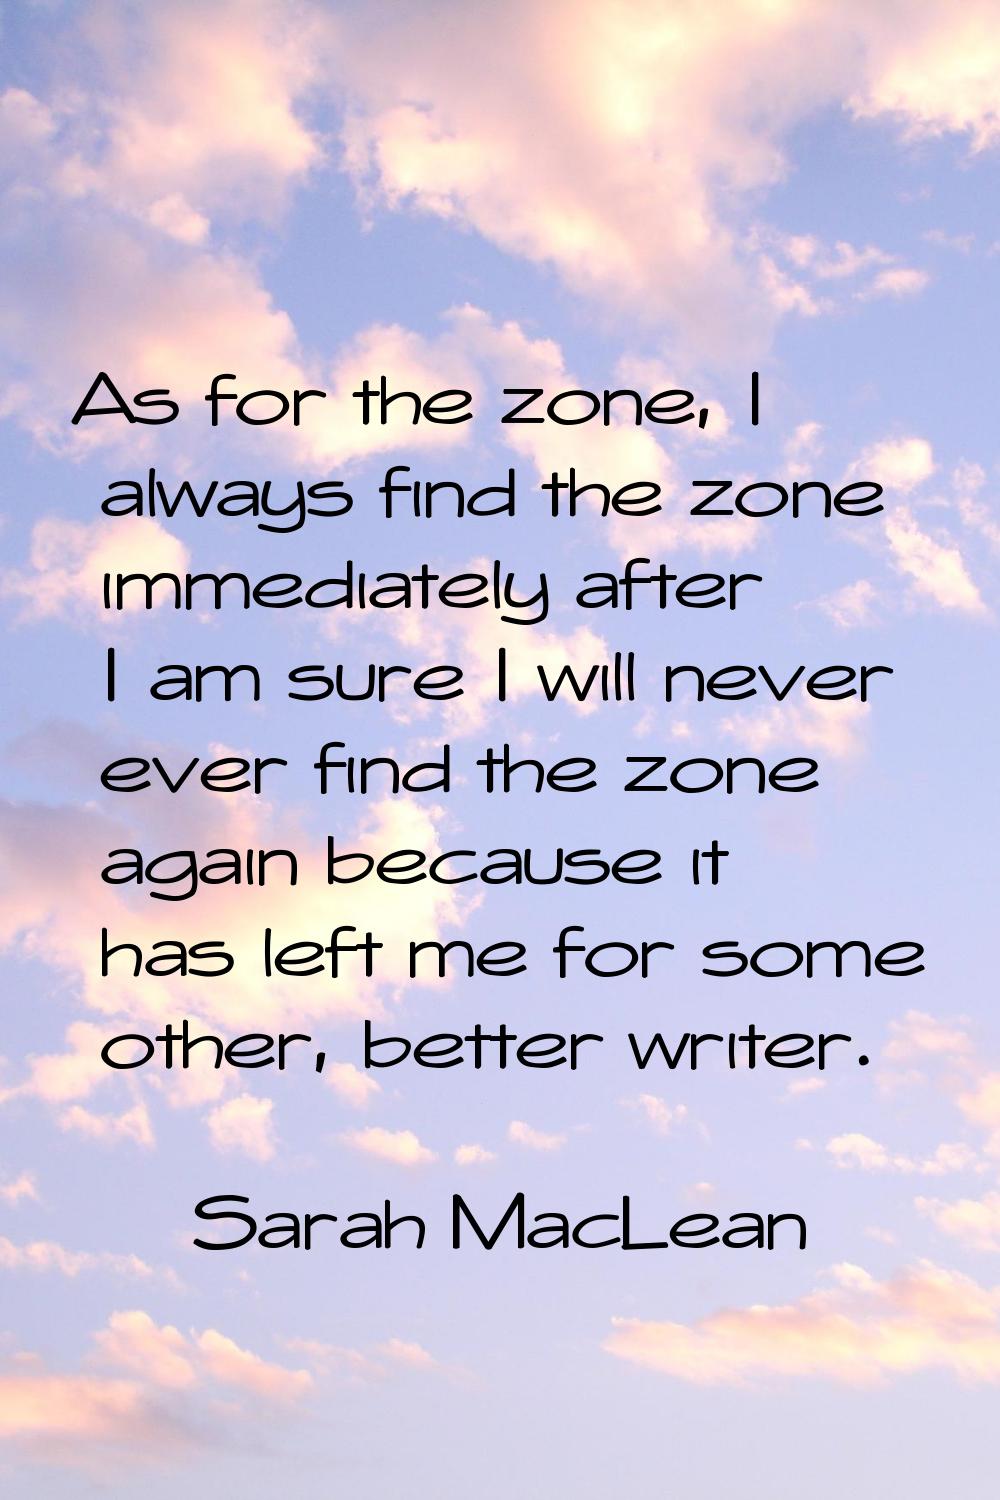 As for the zone, I always find the zone immediately after I am sure I will never ever find the zone